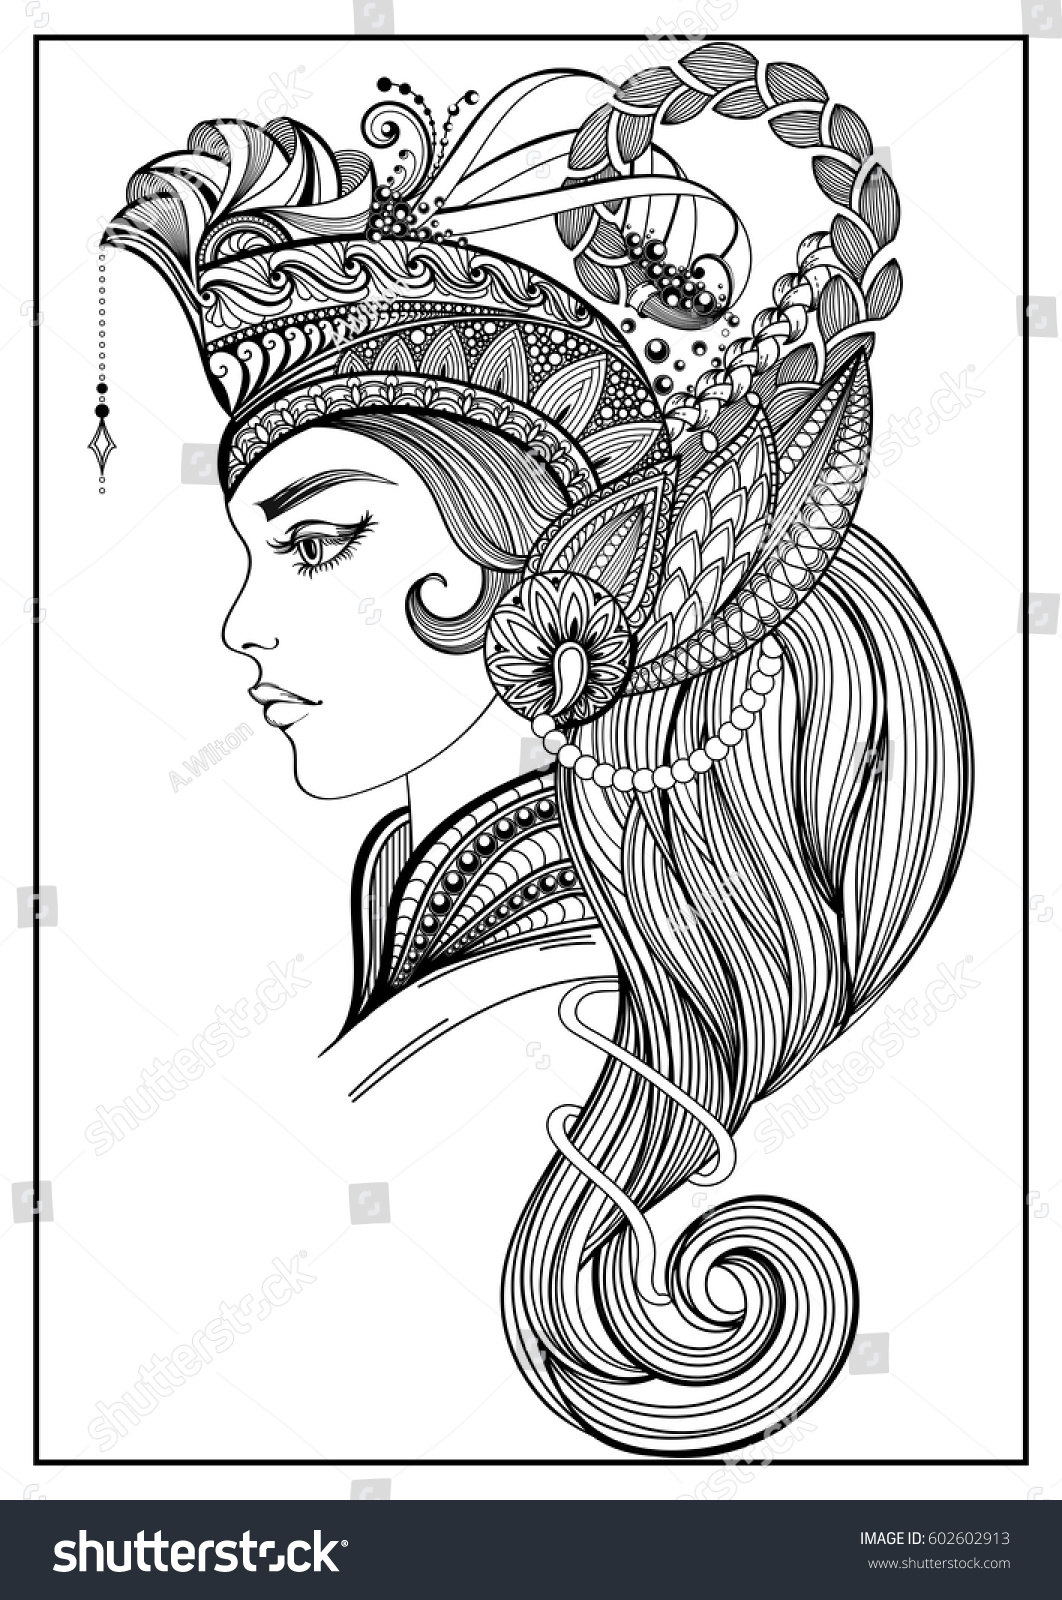 Hand drawn portrait of a bohemian goddess with ornate crown Design for adult coloring page